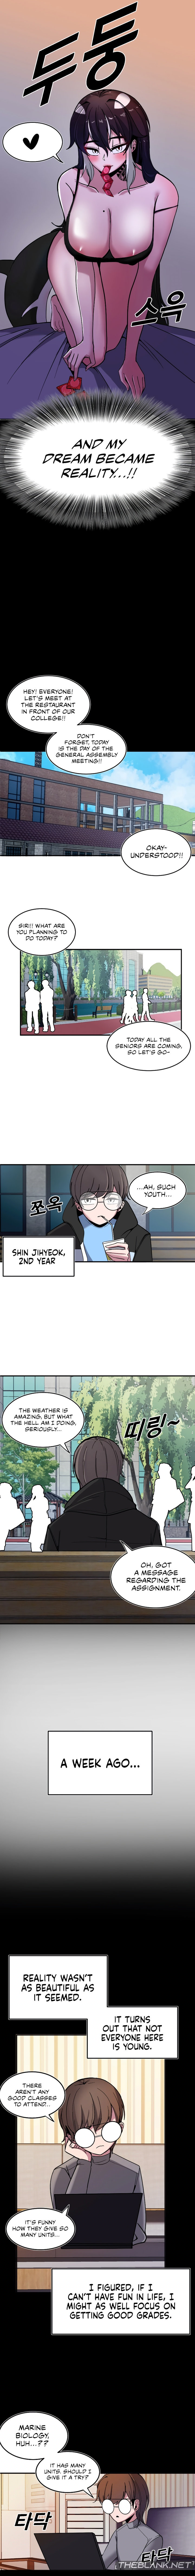 Double Life of Gukbap - Chapter 1 Page 2